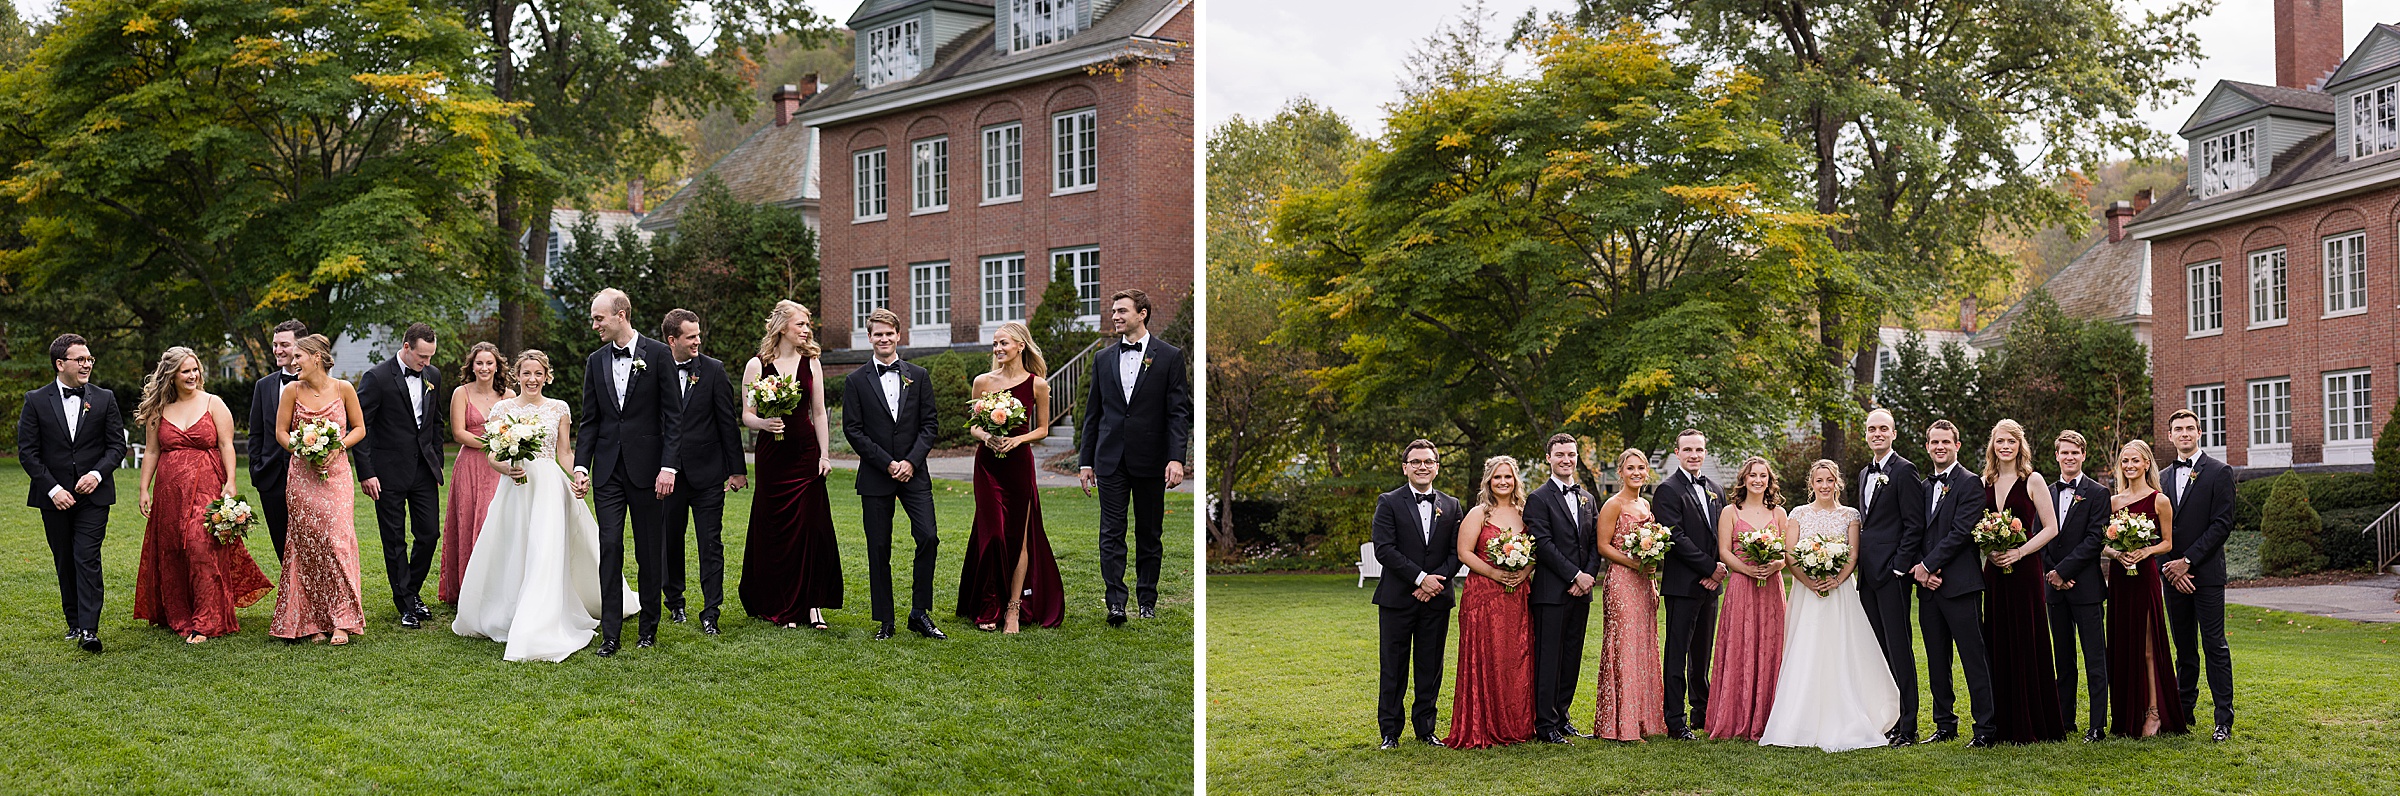 bridal party photography for fall vermont wedding